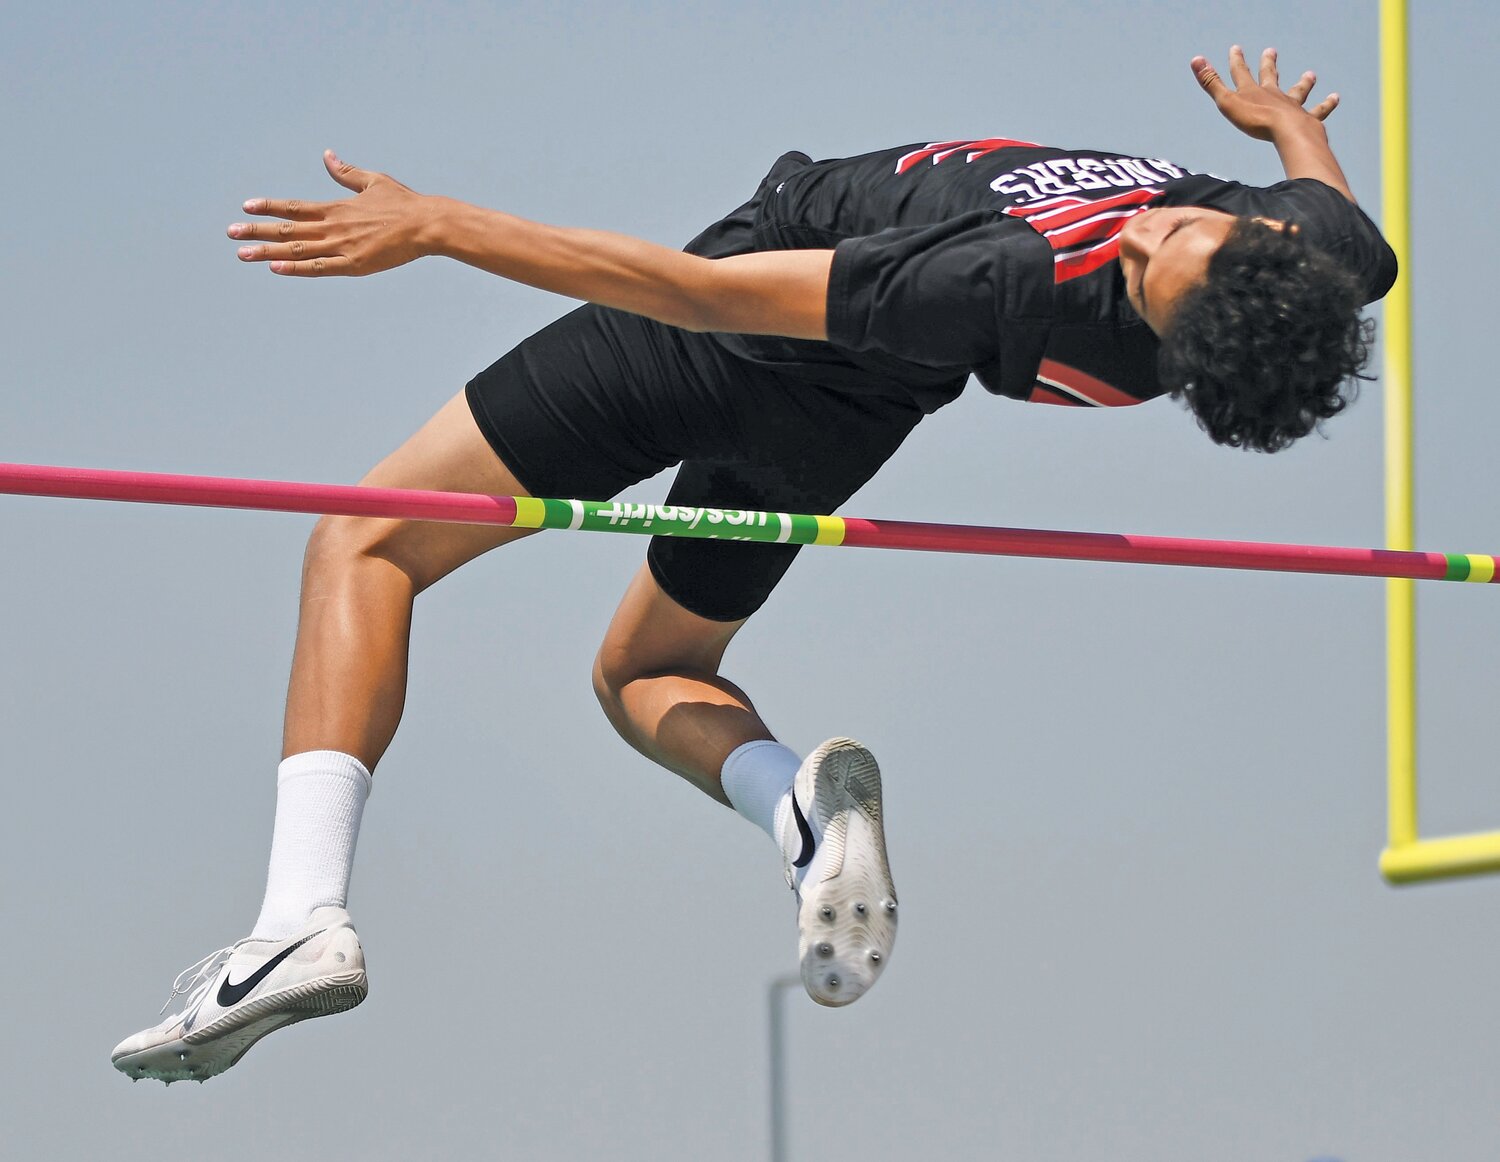 Ranger sophomore Byson McGill — seen here at last year’s 2A State Track and Field Championships in Casper — finished third in the high jump Saturday at the Wind River Icebreaker, clearing a height of 5 feet, 8 inches.